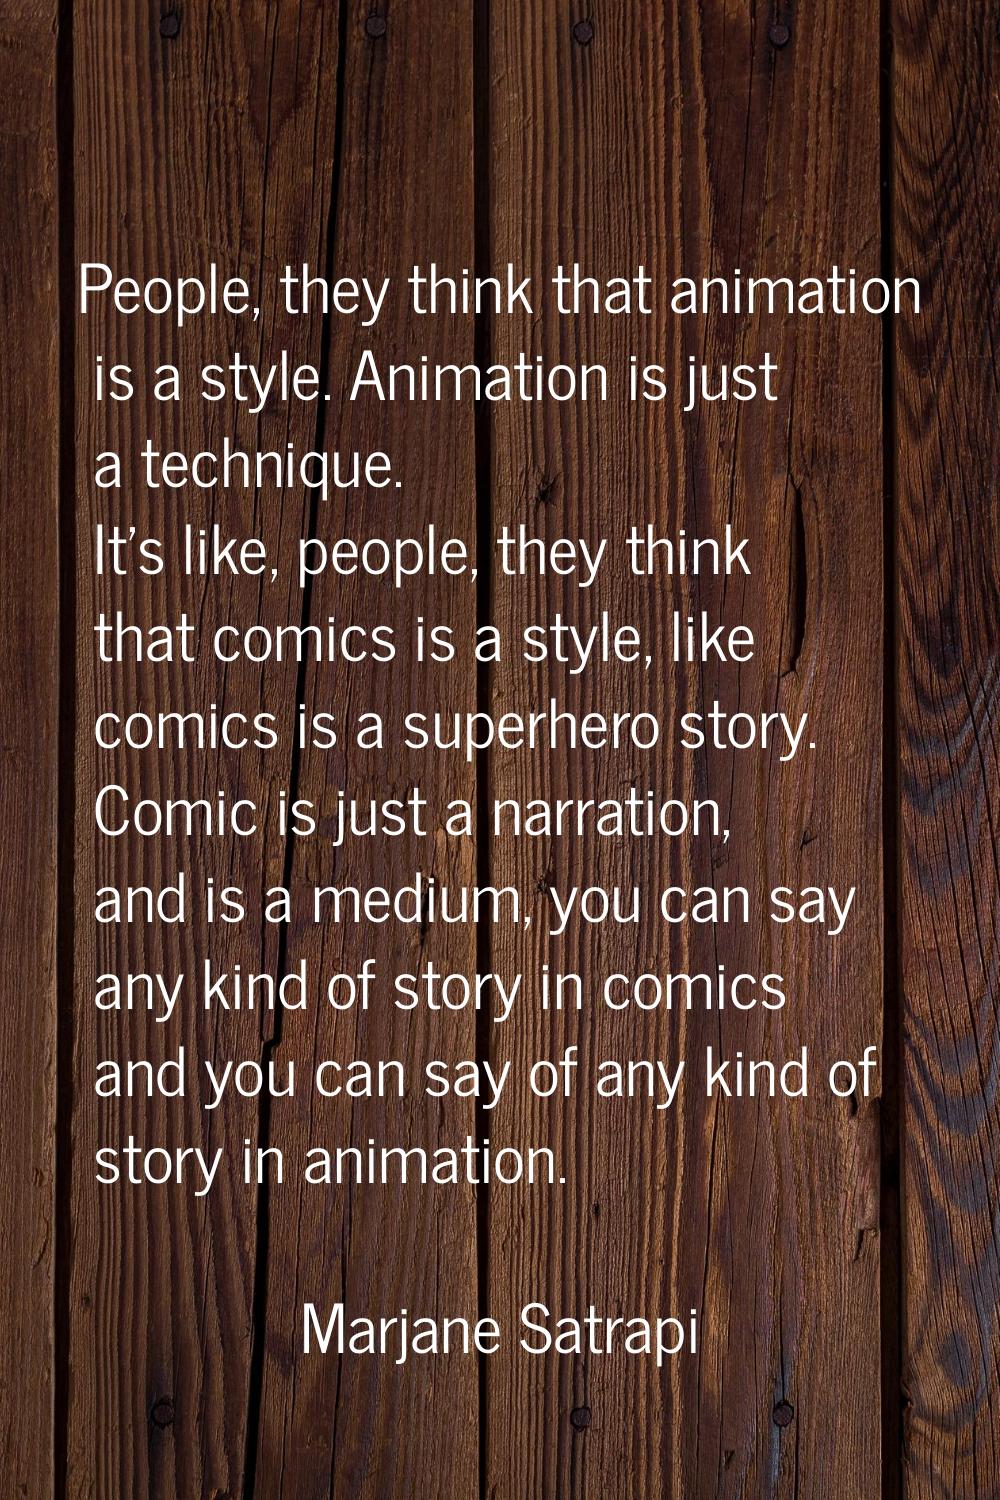 People, they think that animation is a style. Animation is just a technique. It's like, people, the